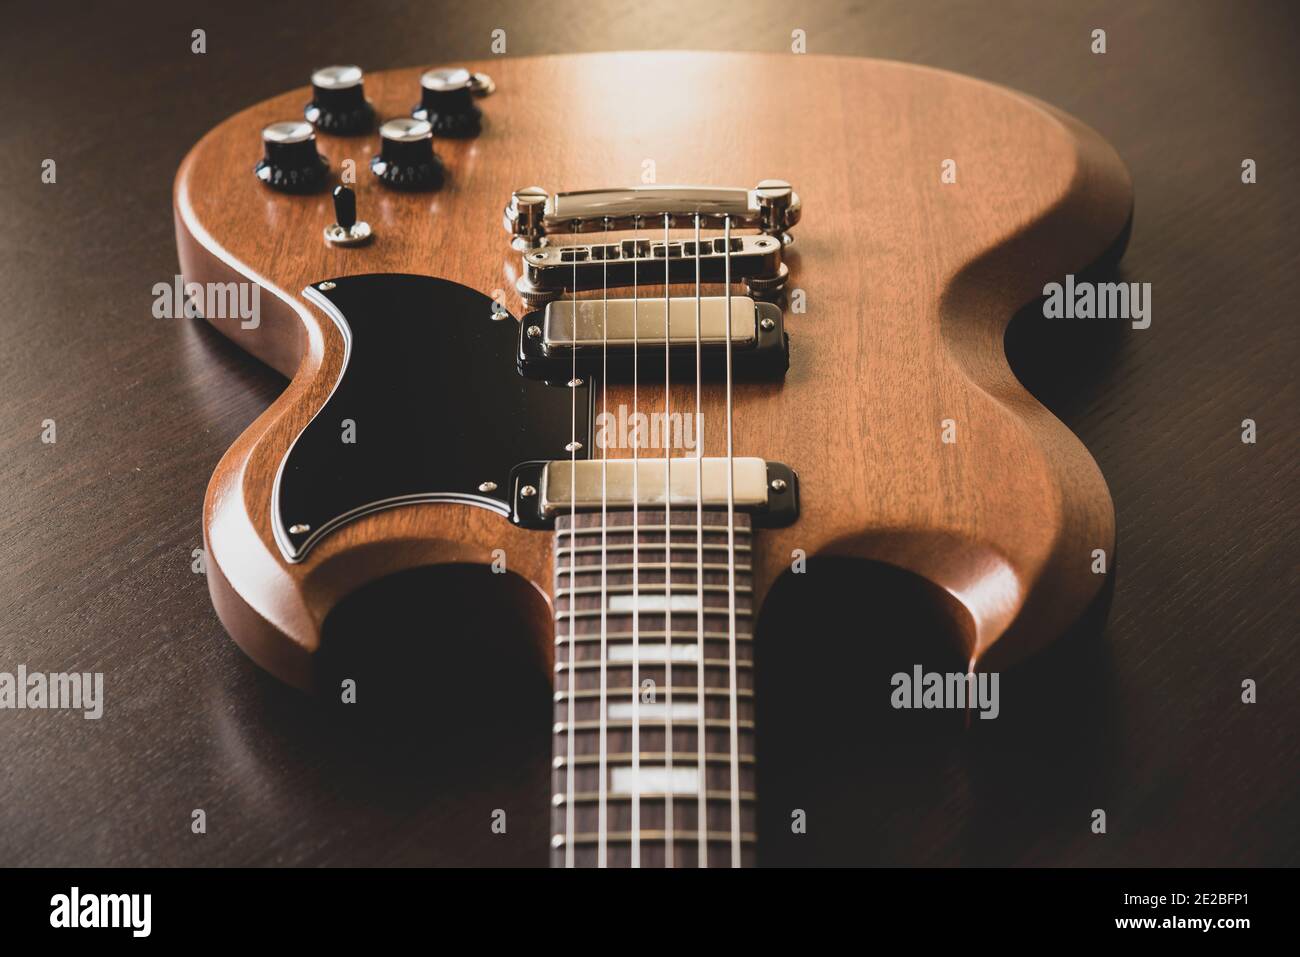 Gibson SG electric guitar on a wooden background Stock Photo